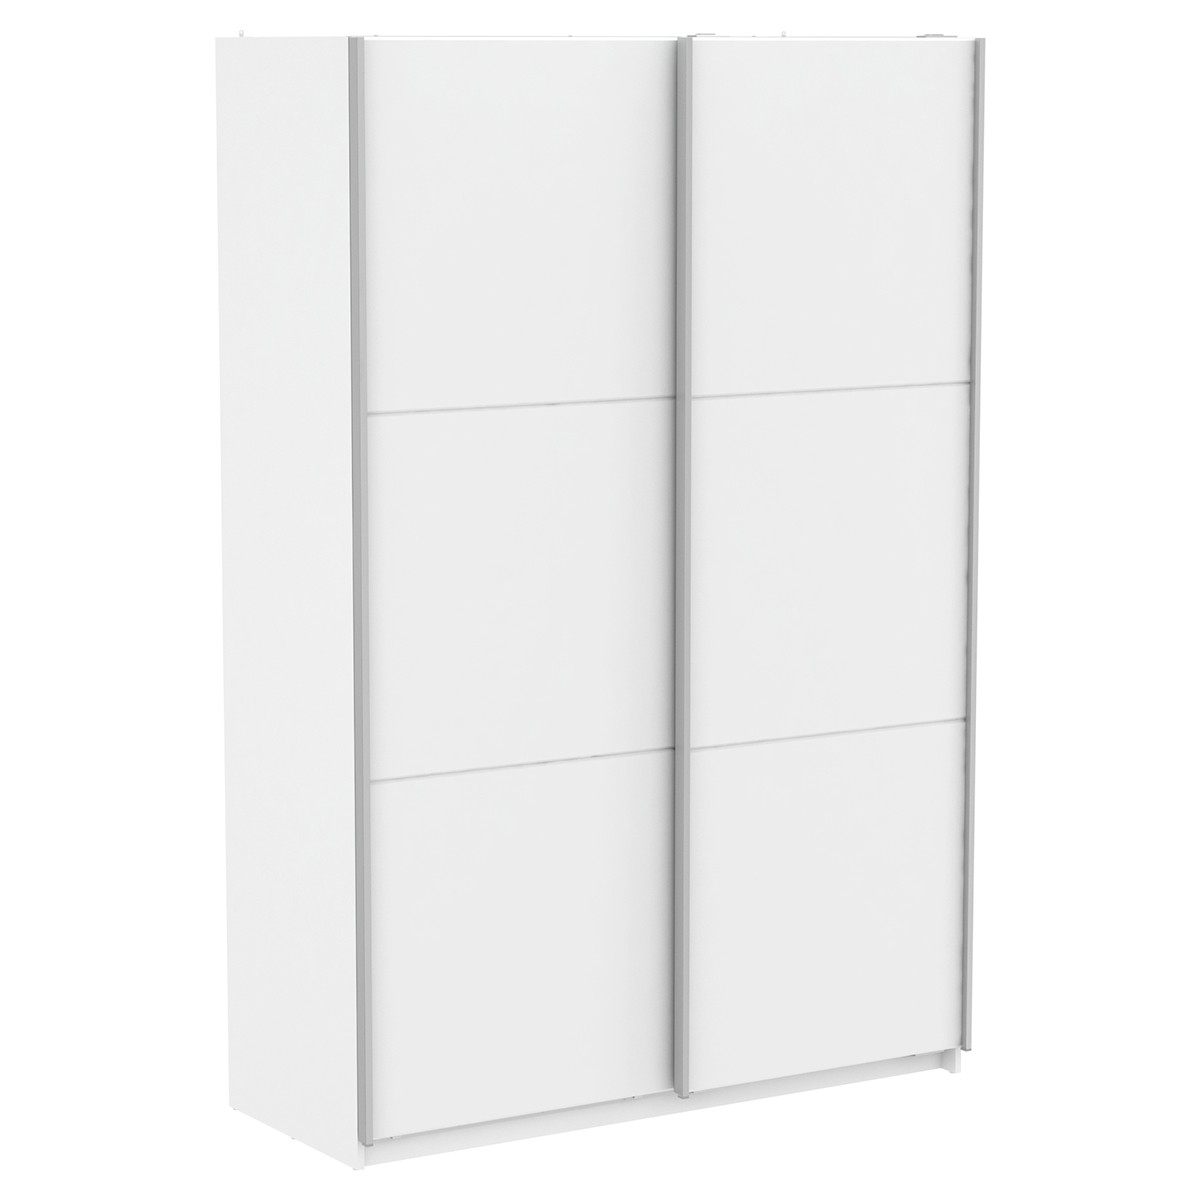 Armoire Blanche 2 Portes Coulissantes Alhambra - Dya-Shopping.fr serapportantà Armoire Conforama Fast